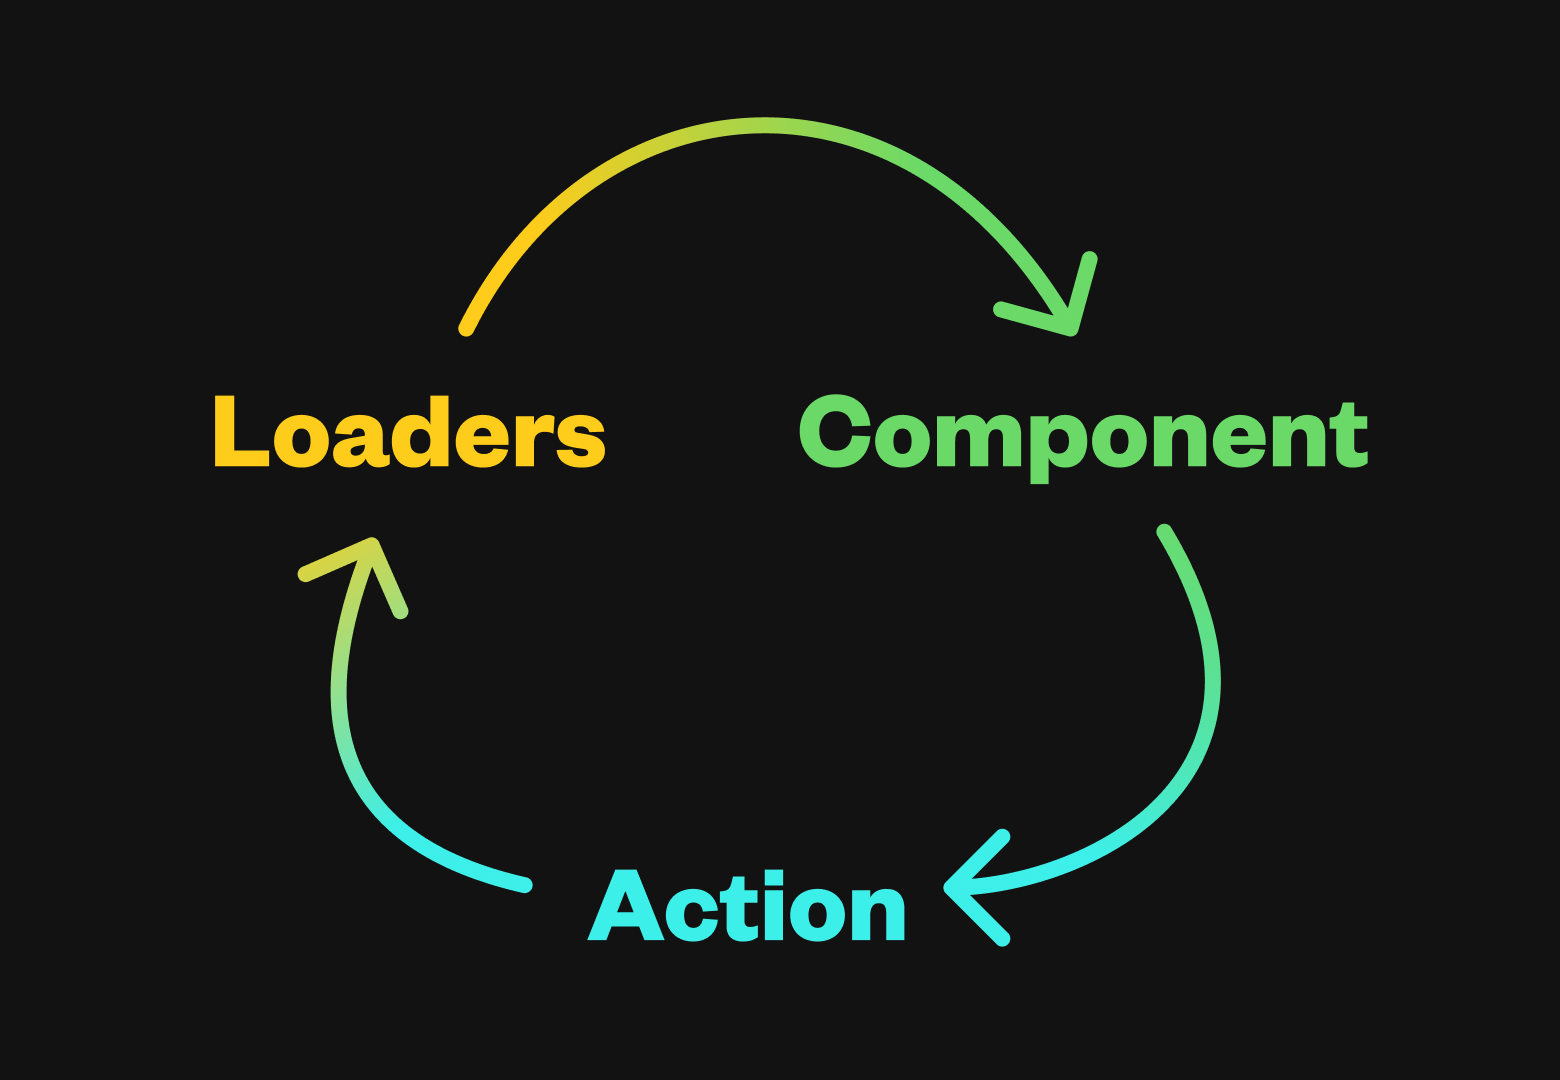 The words “Loader” -&gt; “Action” -&gt; “Component” shown in a circular diagram.